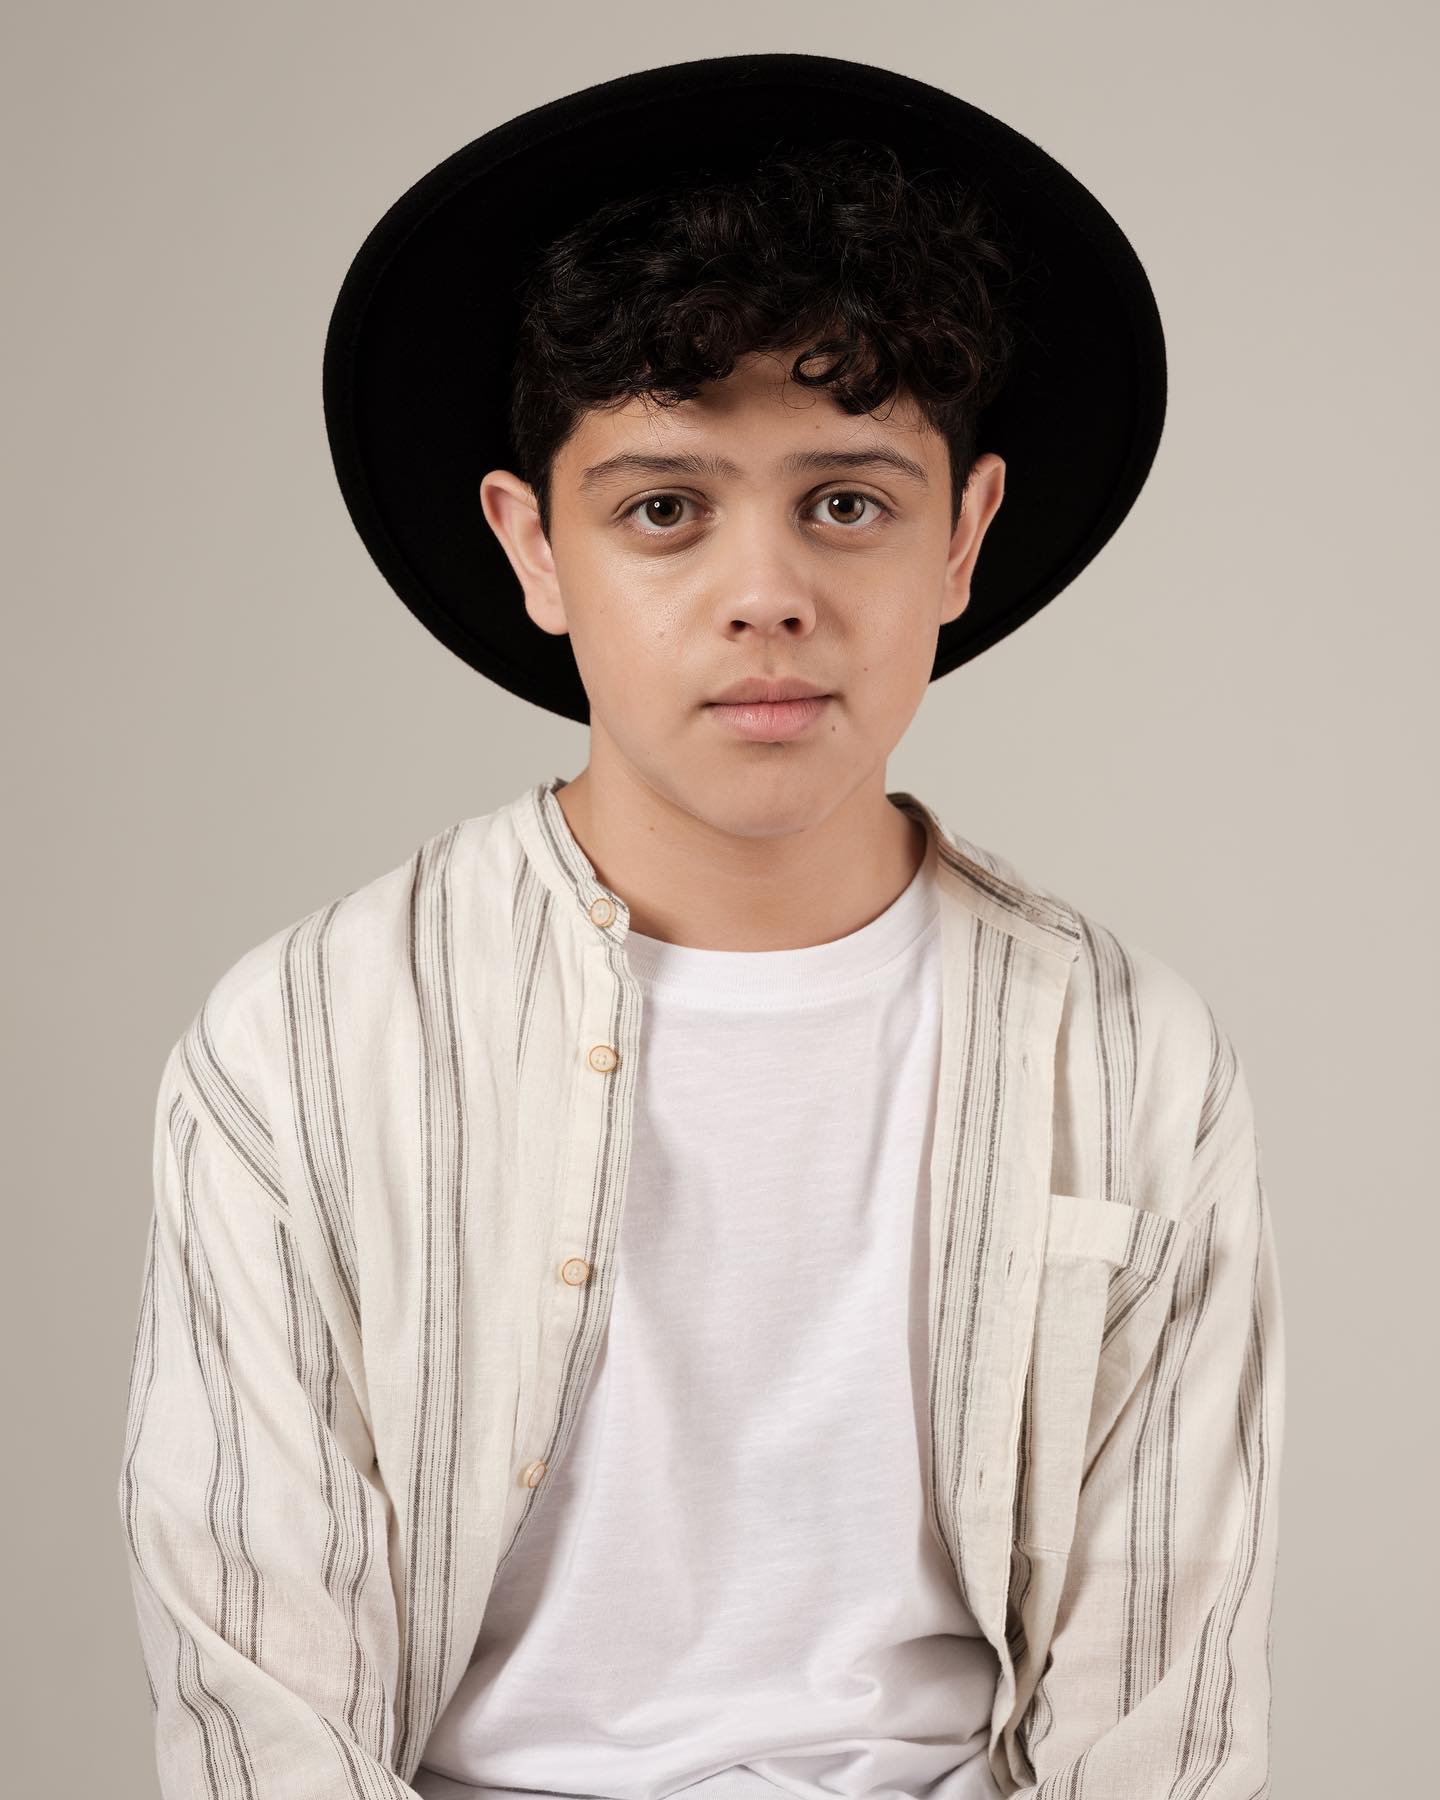 You are currently viewing Who is Isaac Ordonez? Biography, Age, Height, Parents & Wiki